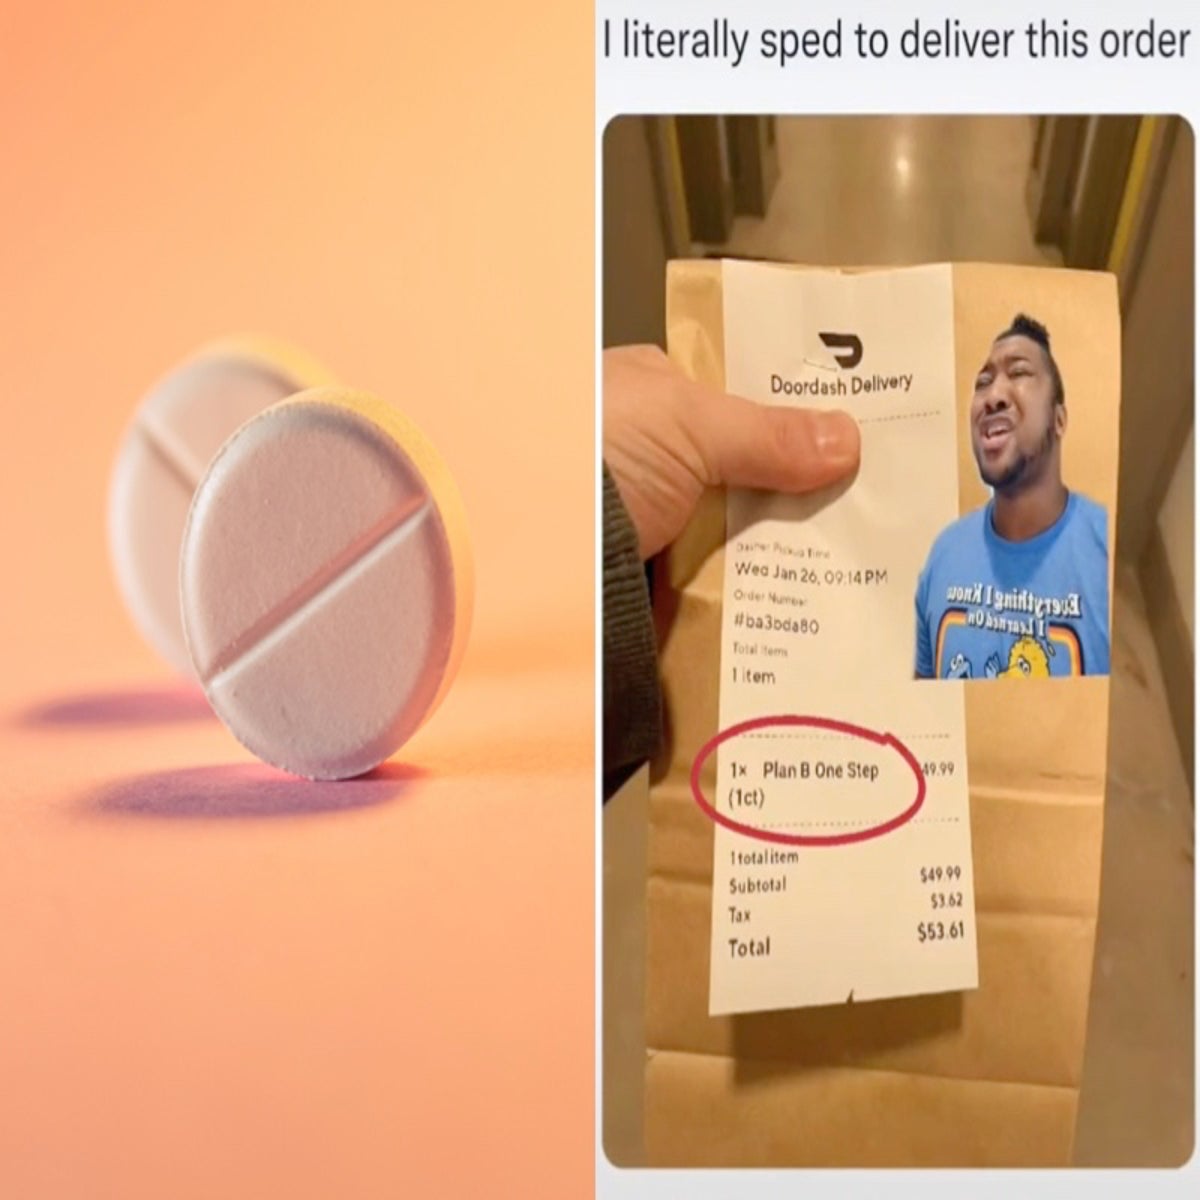 How to File a Complaint with DoorDash